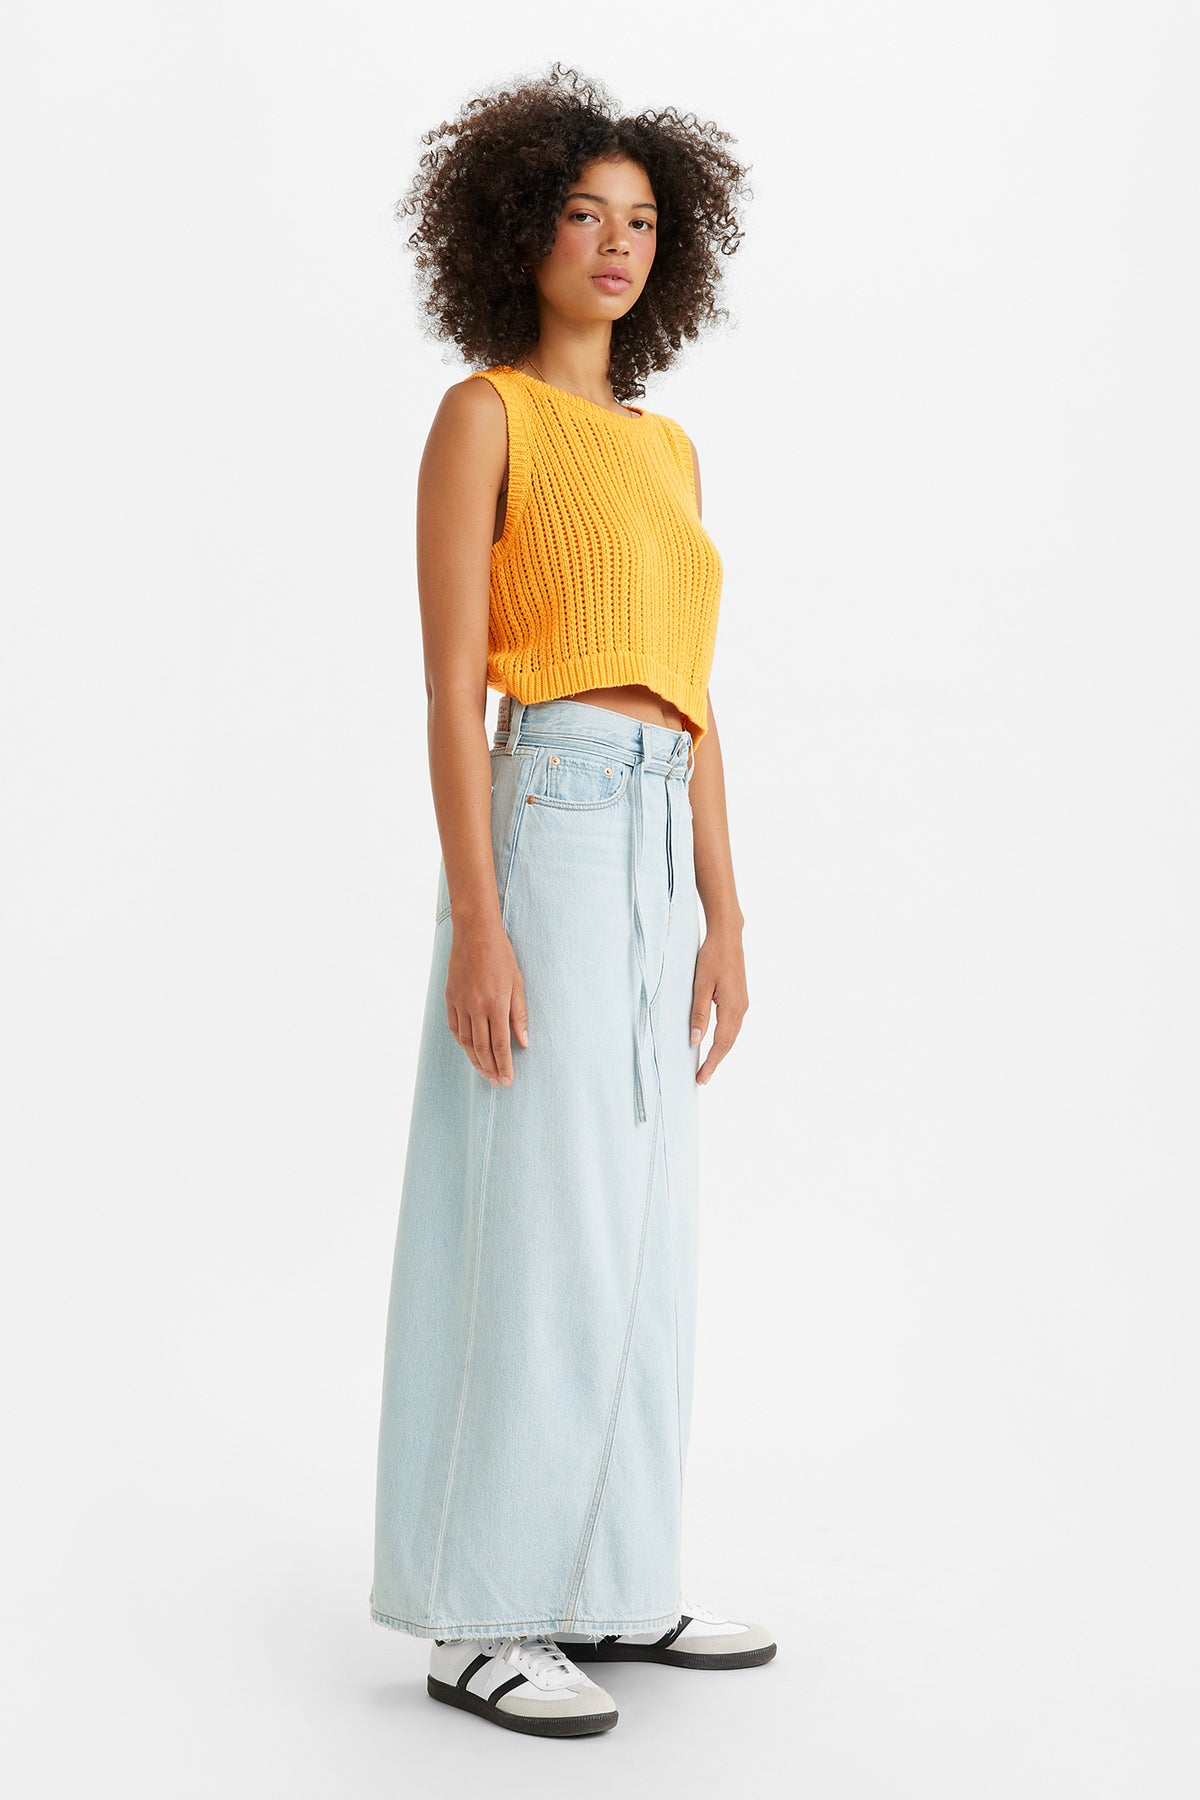 Levi's Long Icon Skirt // My So Called Pant